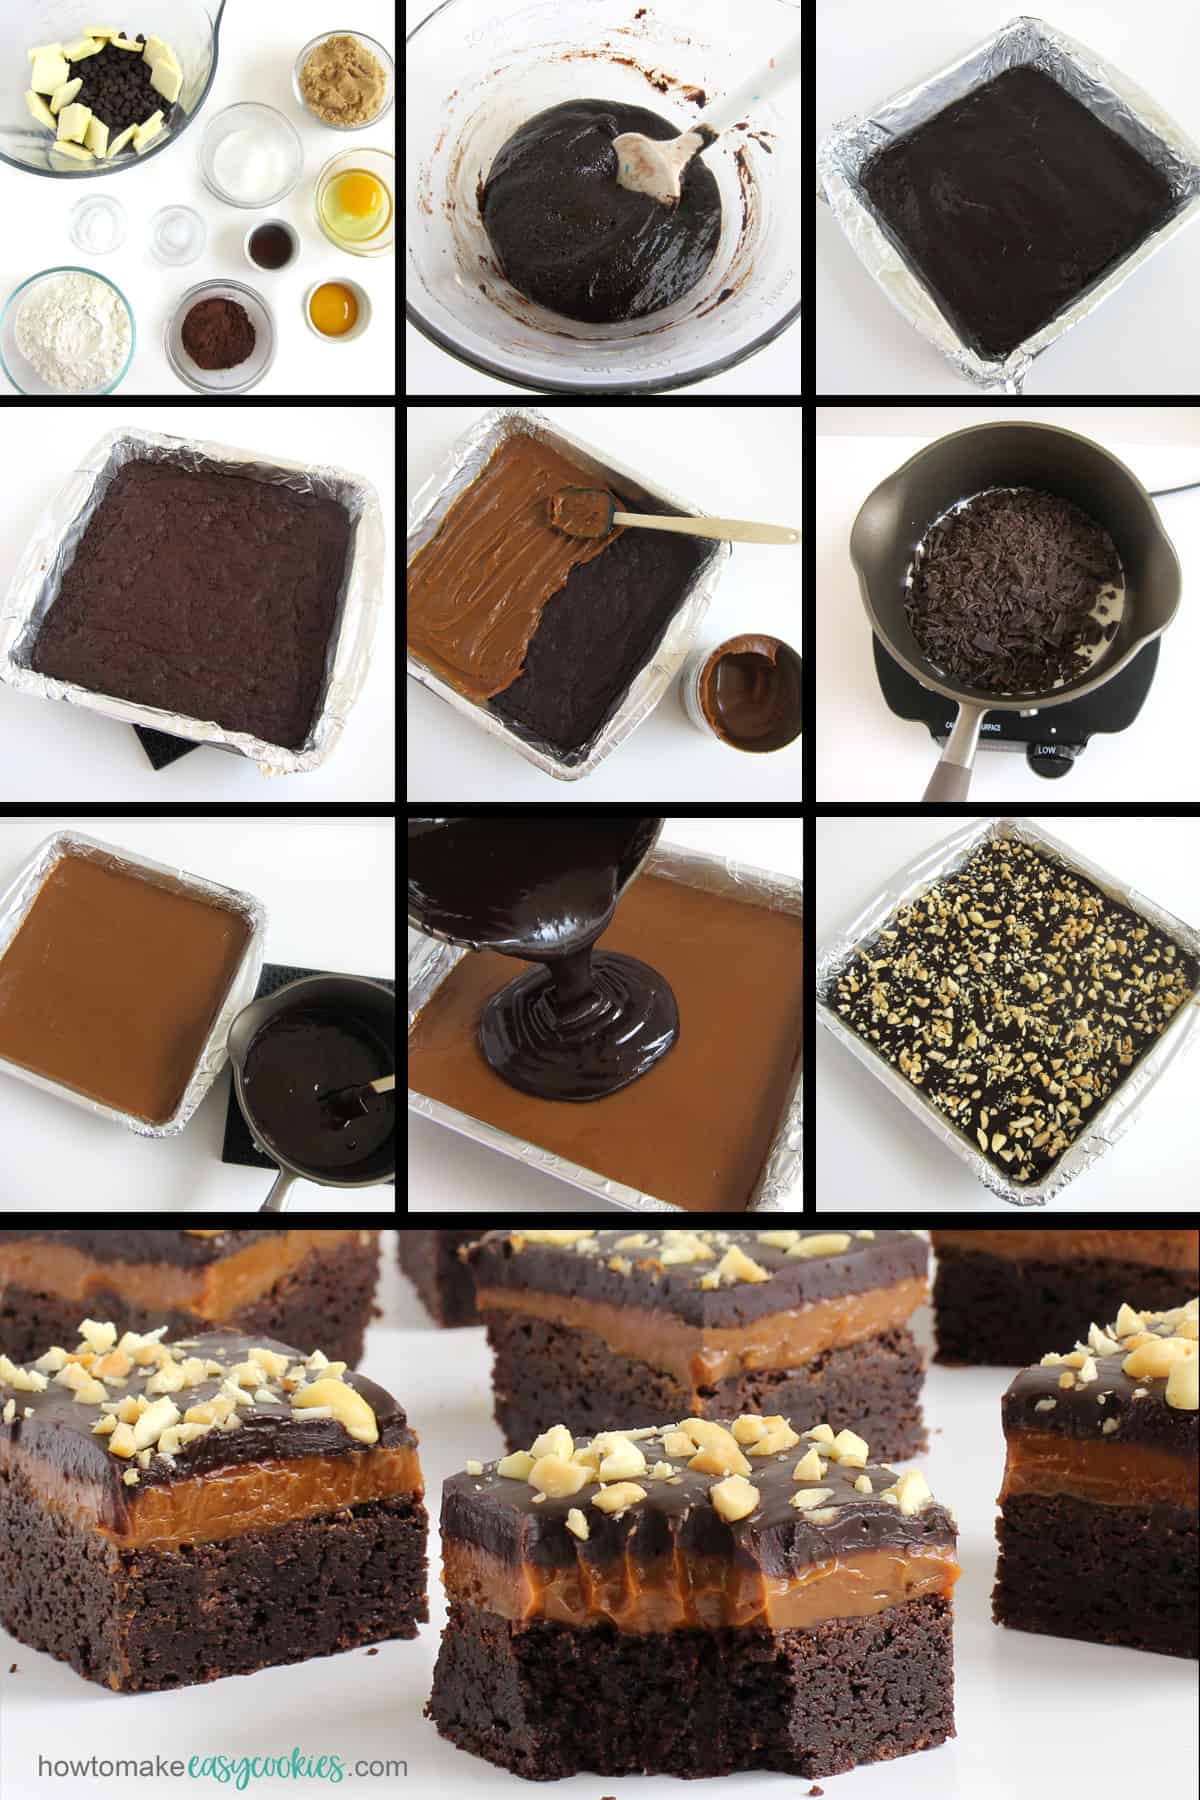 mix and bake chocolate cookie bars then top with caramel, chocolate ganache, and peanuts